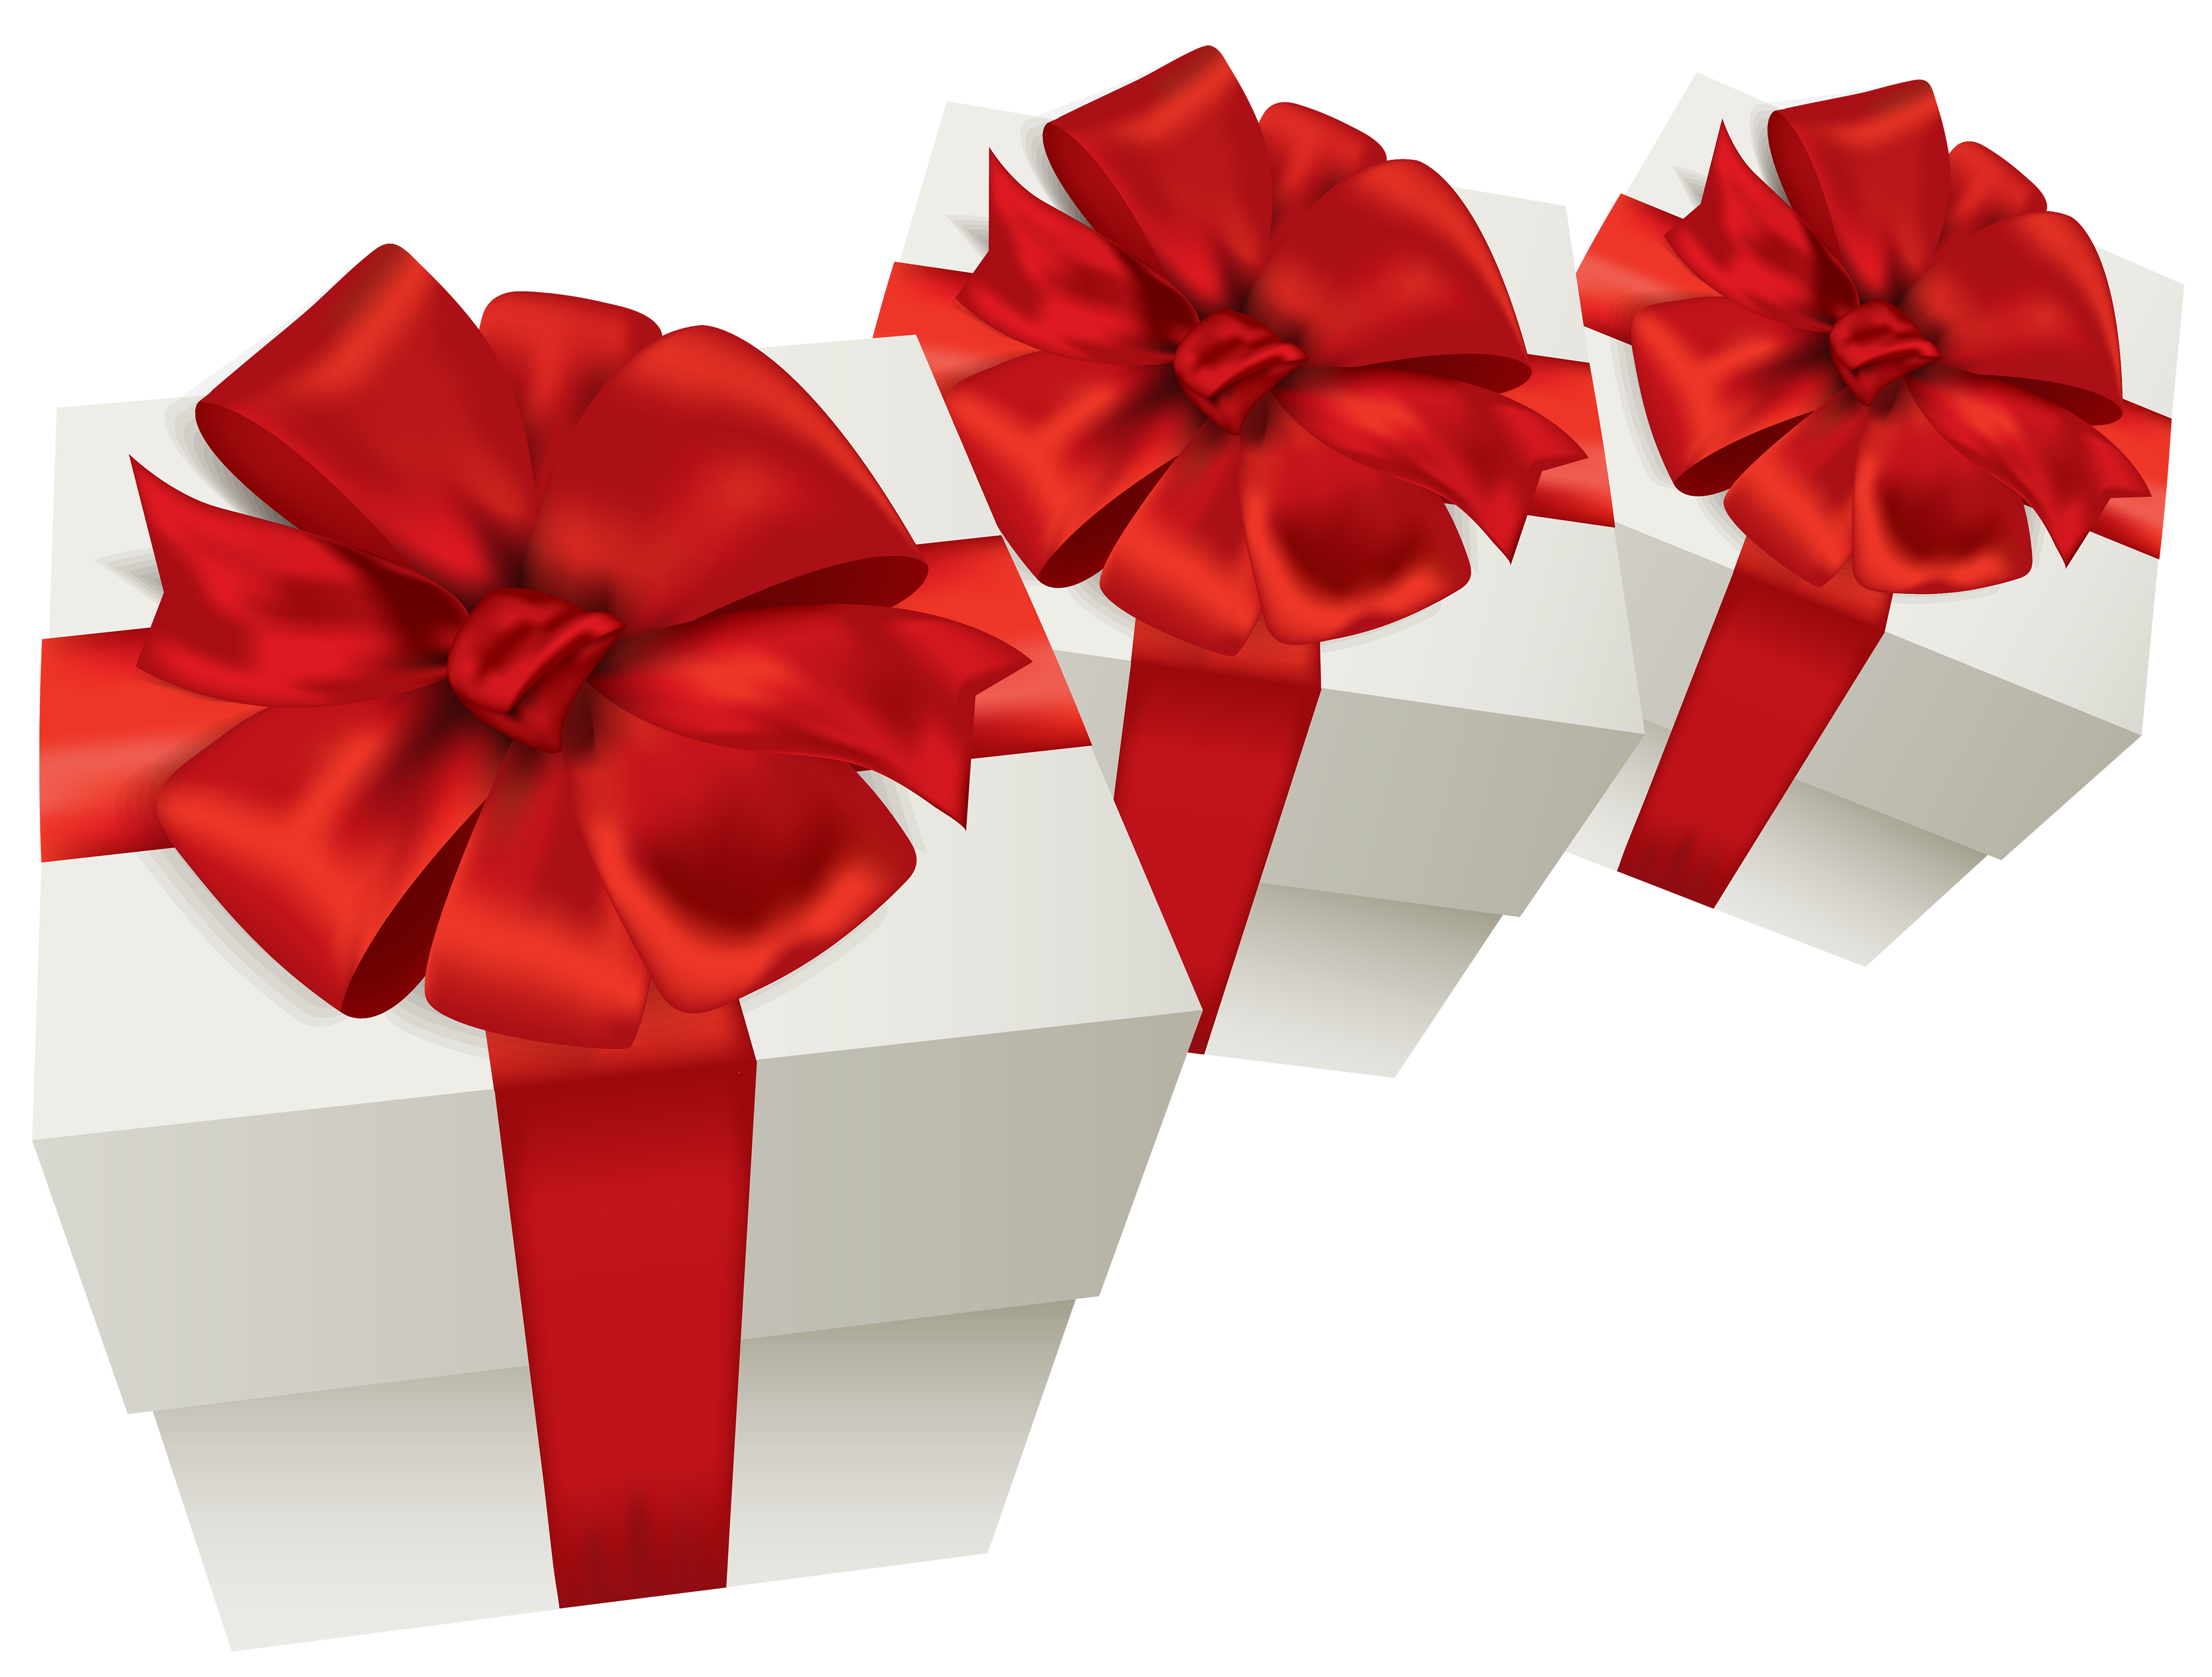 White boxes png best. Flowers clipart gift